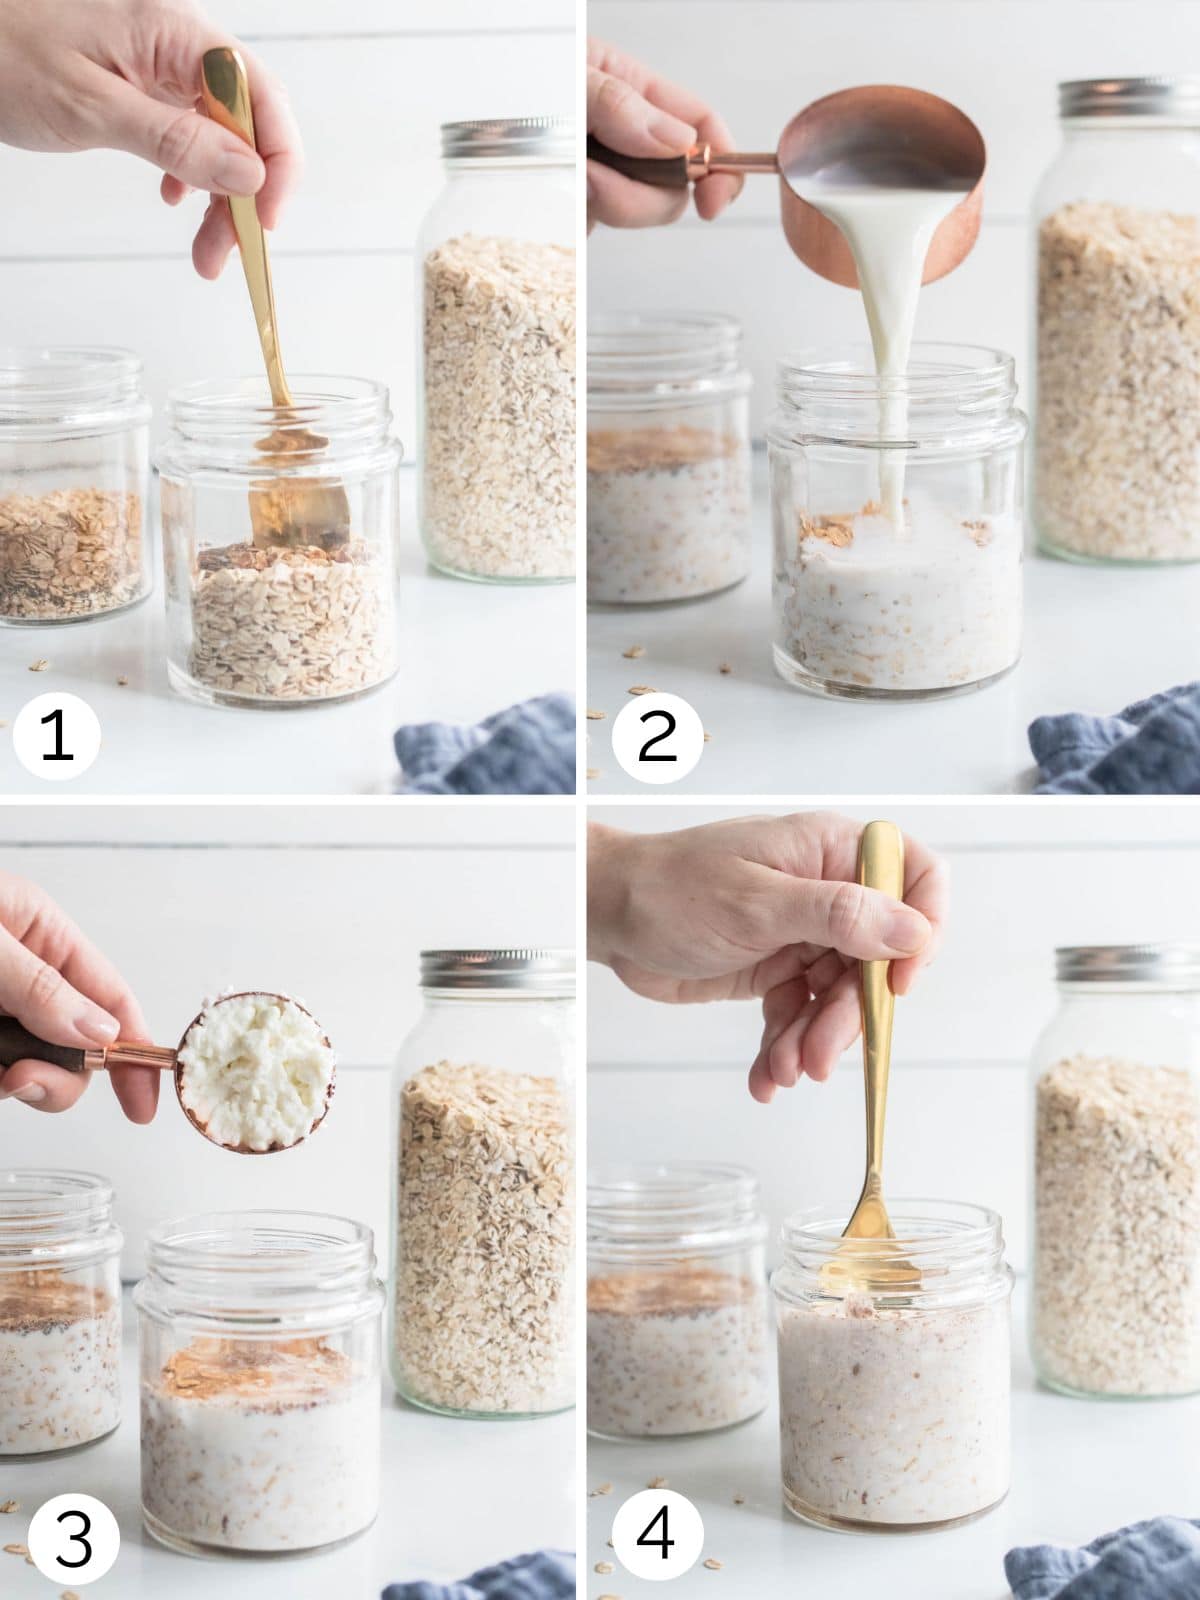 Process shots of making overnight oats with cinnamon.